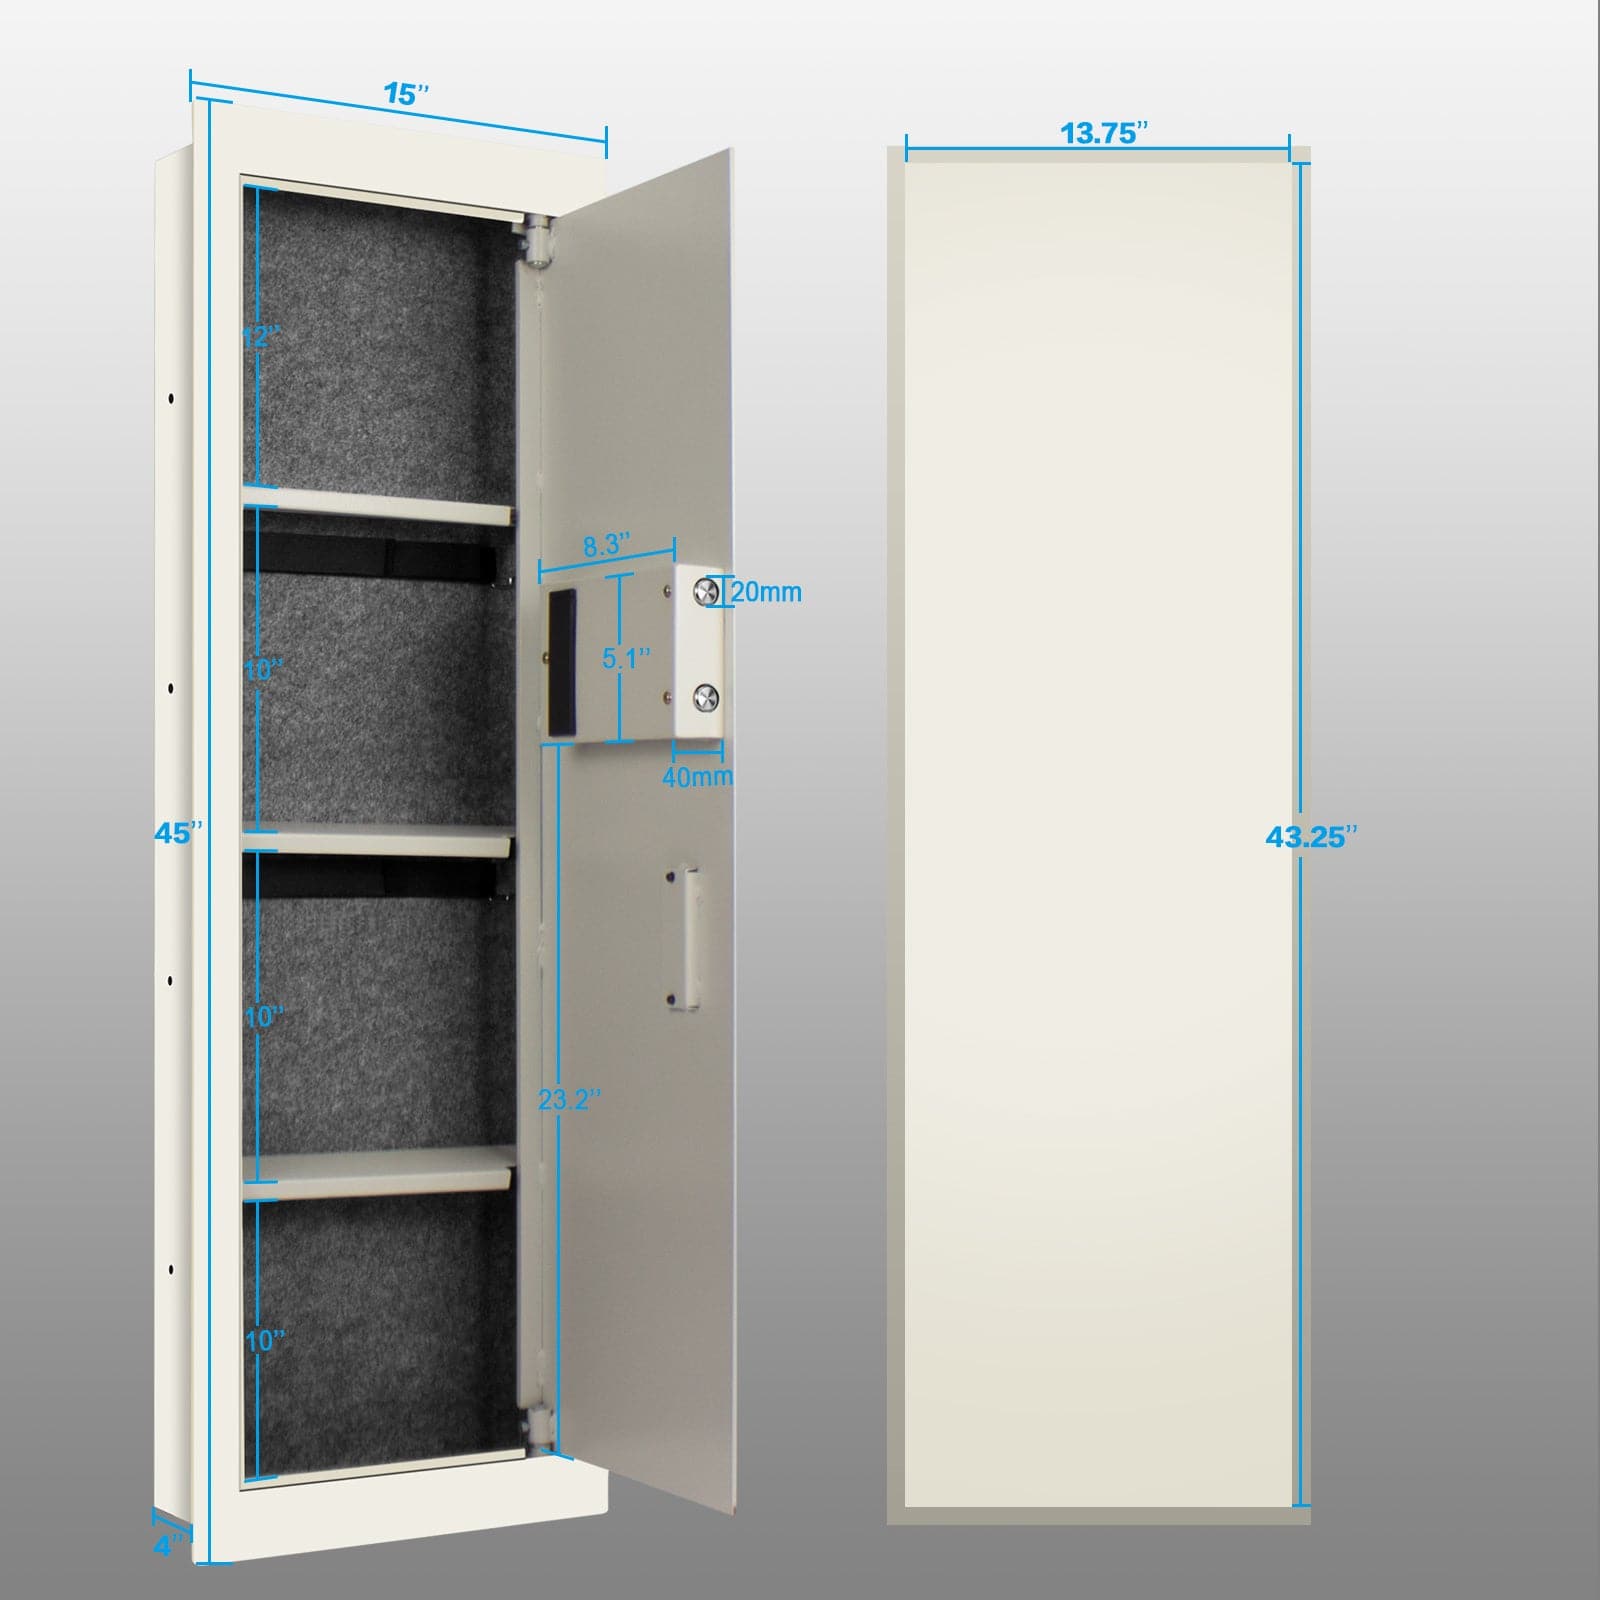 Biometric Wall Safe, White, Large - LAWS002